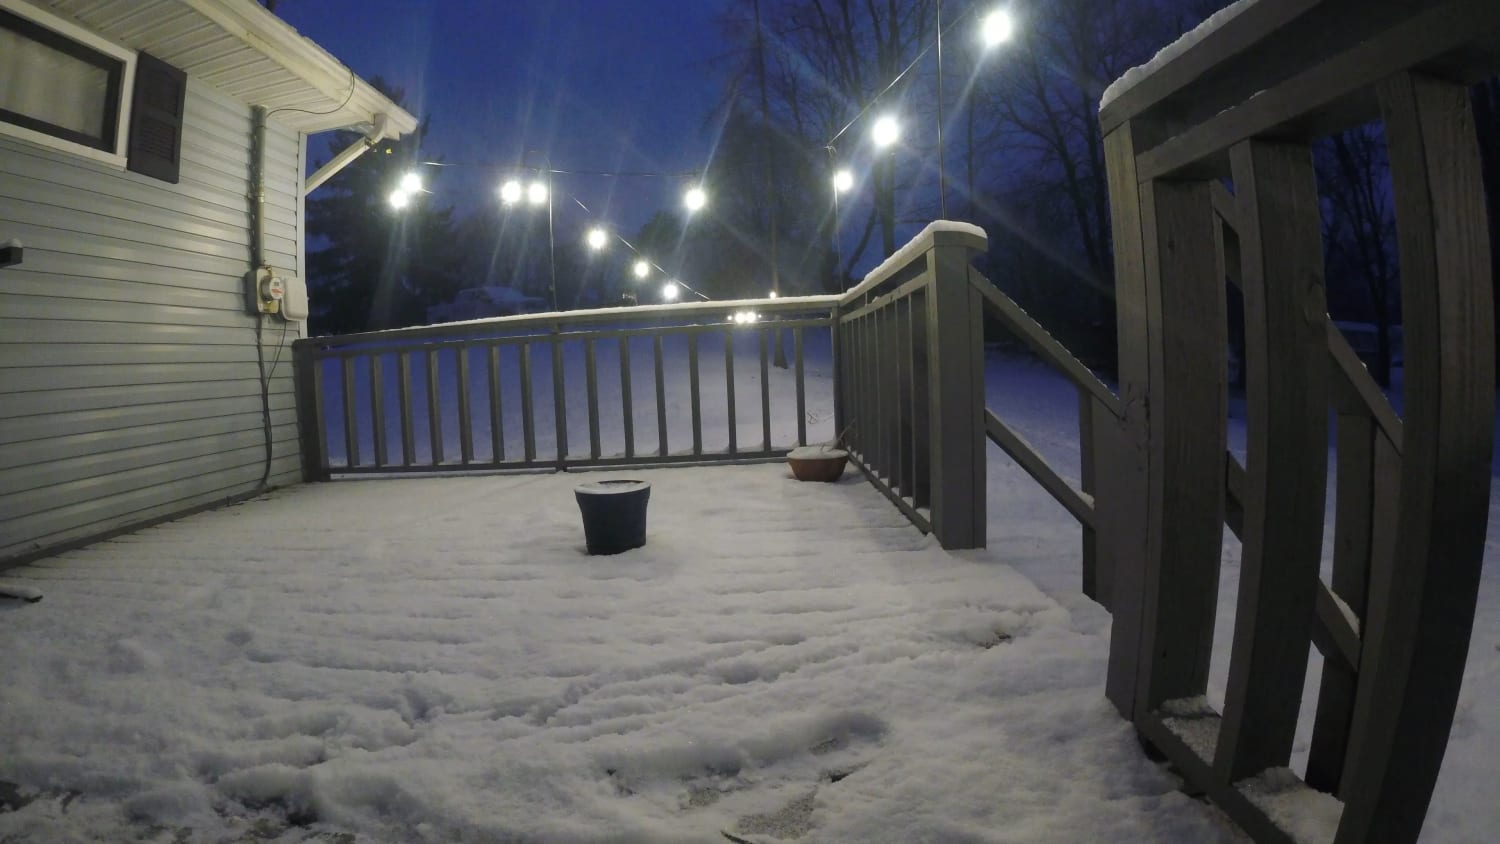 20 inches of snow in 10 hours. Time lapse to 30 seconds. Michigan.